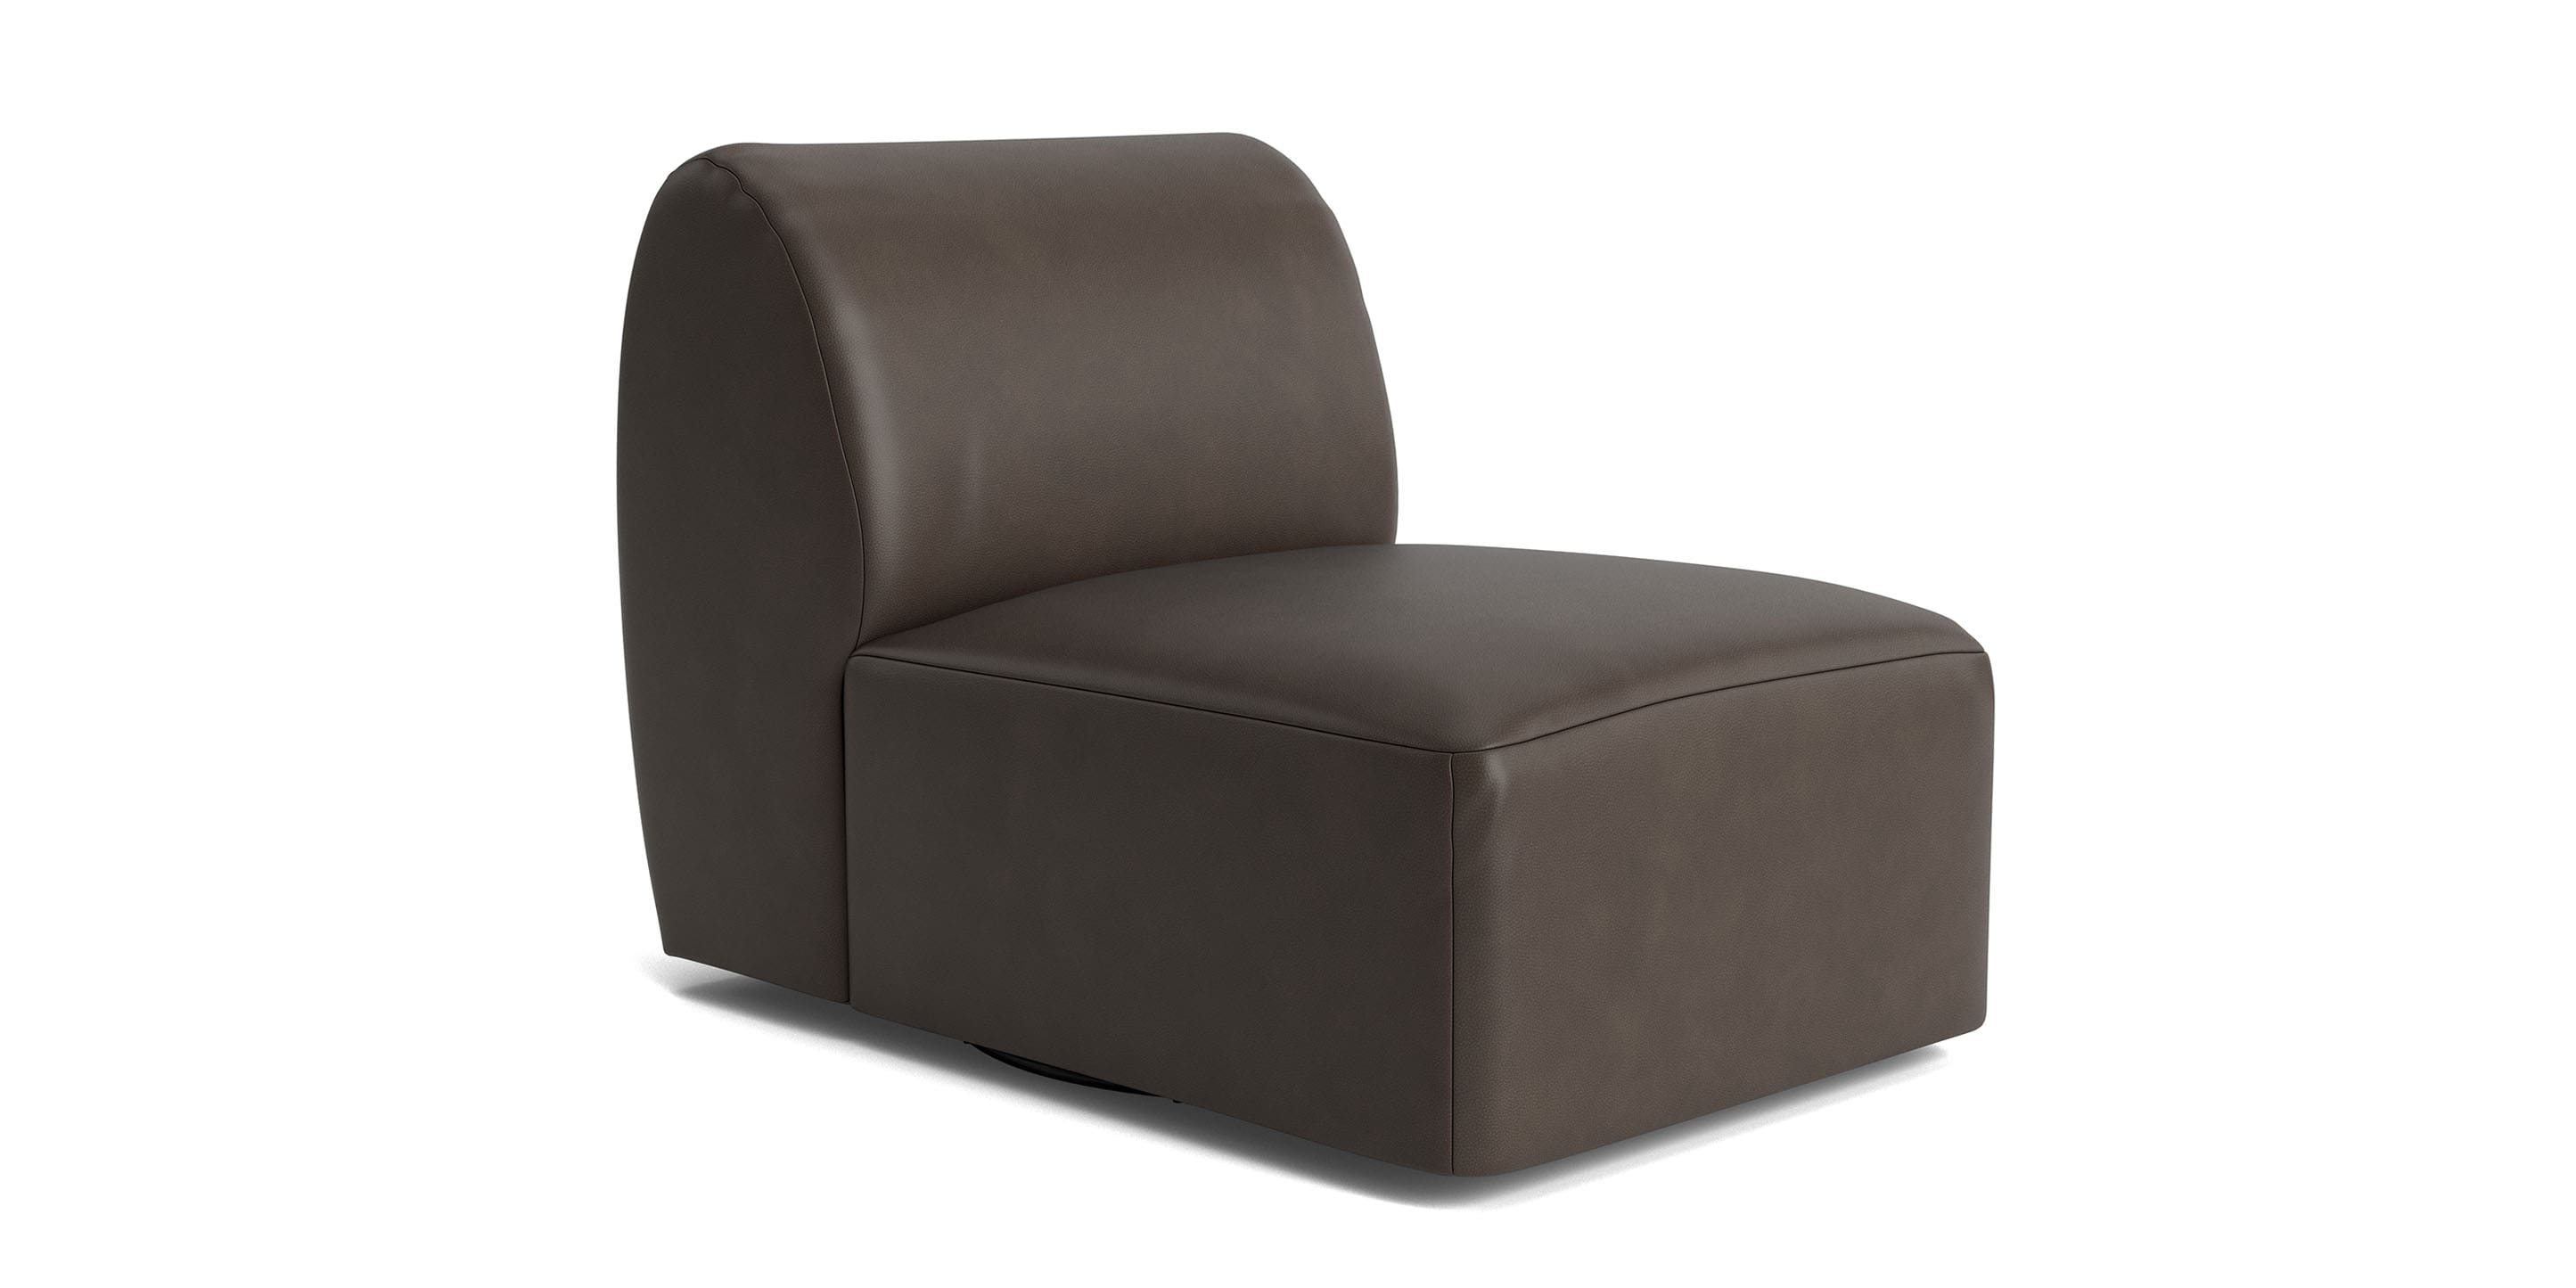 Clyde Leather Swivel Chair